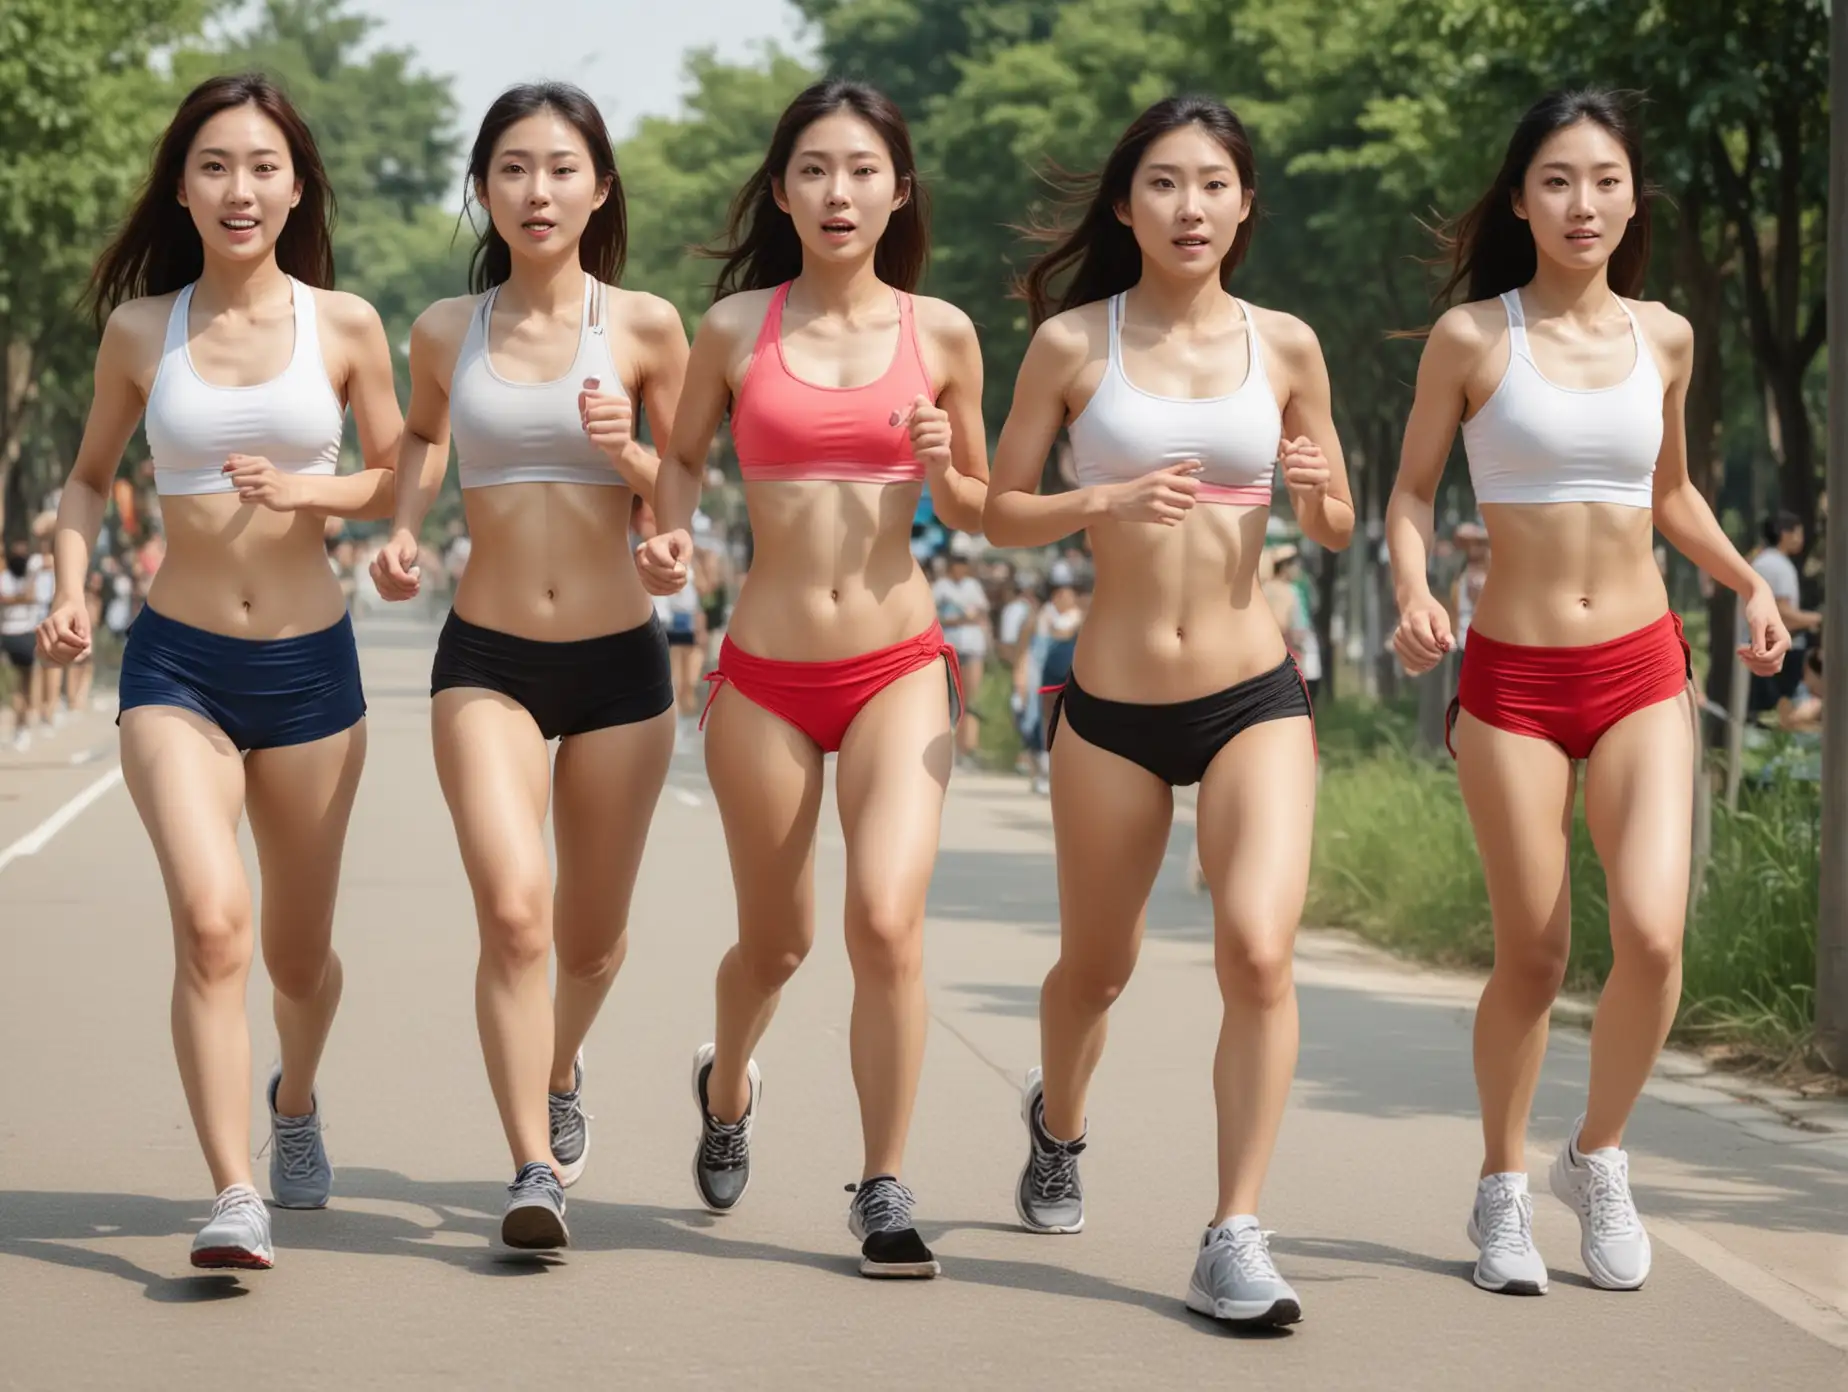 frontal shot of skinny young chinese women with extreme hourglass figures running a 5k on a hot day.  each girl's hips are as wide as possible. each girl's waist is as narrow as possible. each girl's legs are as slender as possible. each girl's belly is as flat as possible. each girl's face is sweet and unique.